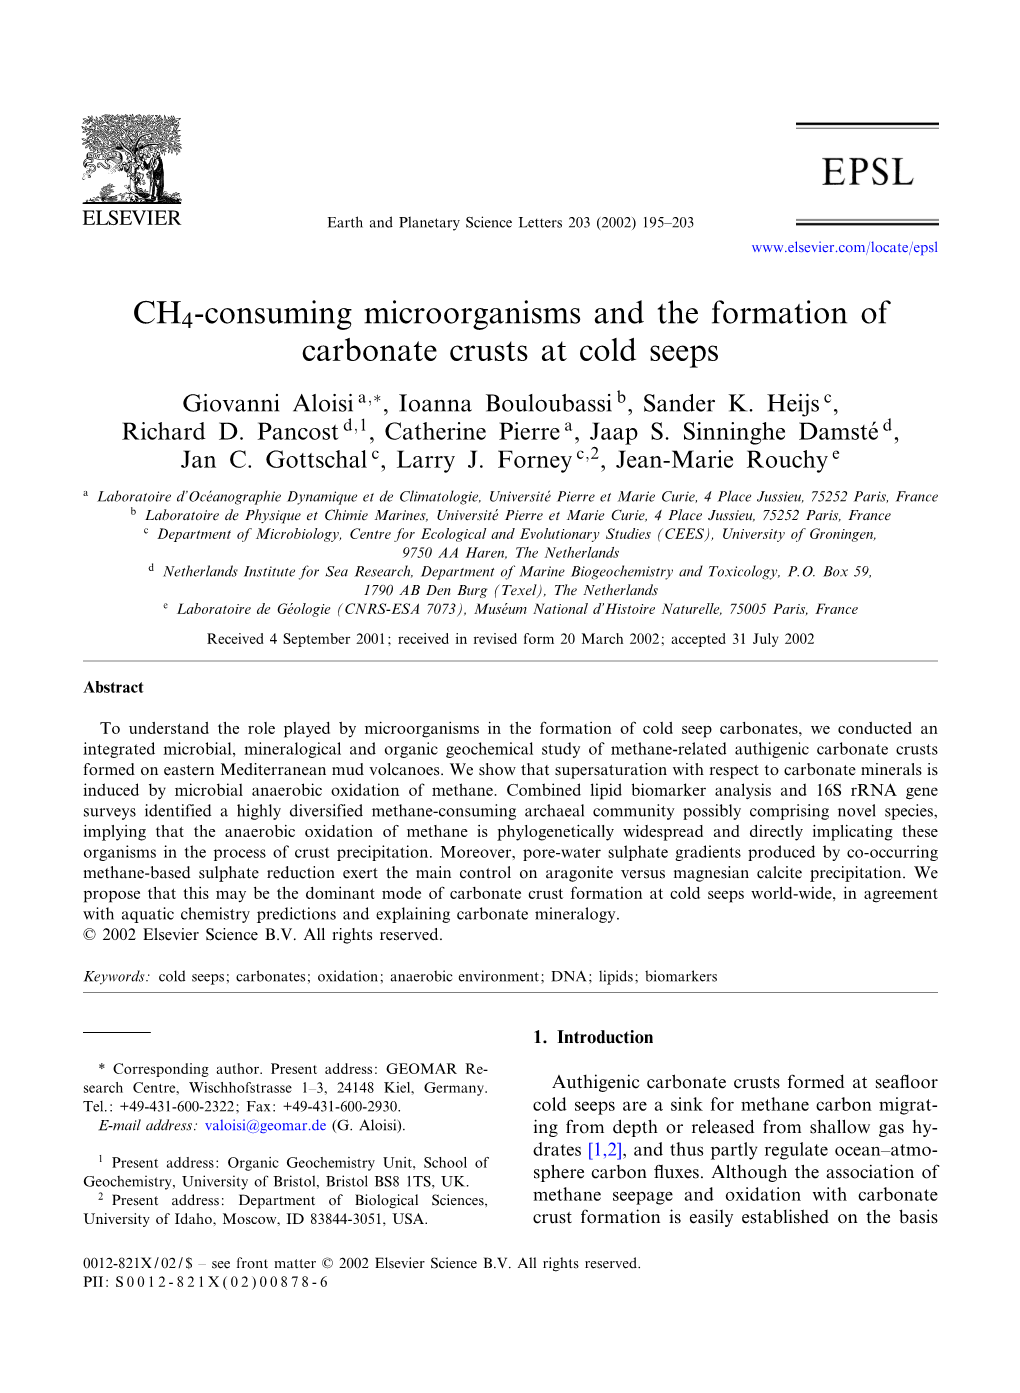 CH4-Consuming Microorganisms and the Formation of Carbonate Crusts at Cold Seeps